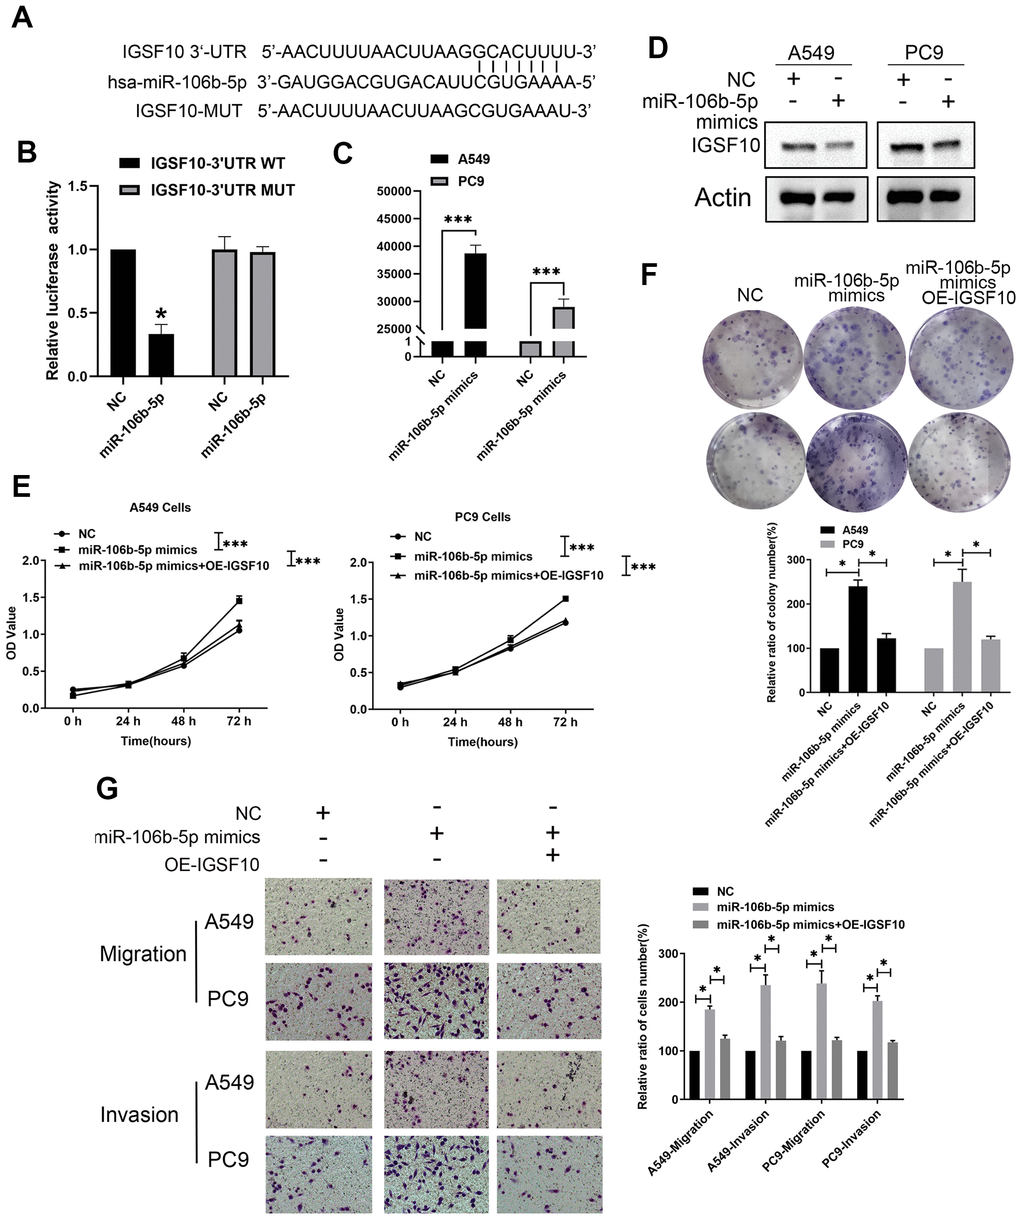 MiR-106b-5p suppresses IGSF10 expression by binding to its 3’-UTR. (A) Dual luciferase assay results show that miR-106b-5p directly targets the 3′-UTR of IGSF10. (B) Dual luciferase assay results show that relative luciferase activity is significantly repressed in LAUD cells co-transfected with miR-106b-5p and wild type 3′-UTR of IGSF10 compared to those co-transfected with miR-106b-5p and mutated 3′-UTR of IGSF10 (P C) RT-qPCR analysis shows expression levels of miR-106b-5p in A549 and PC9 cells transfected with non-specific control (miR-NC) or miR-106b-5p mimics. (D) Western blot analysis shows IGSF10 protein levels in A549 and PC9 cells transfected with non-specific control (miR-NC) or miR-106b-5p mimics. (E) MTT assay and (F) colony formation assays show proliferative ability of A549 and PC9 cells transfected with non-specific control (miR-NC) or miR-106b-5p mimics. (G) Transwell assay results show migration and invasion ability of A549 and PC9 cells transfected with non-specific control (miR-NC) or miR-106b-5p mimics. Results are shown as means ± SD; * p **p ***p 